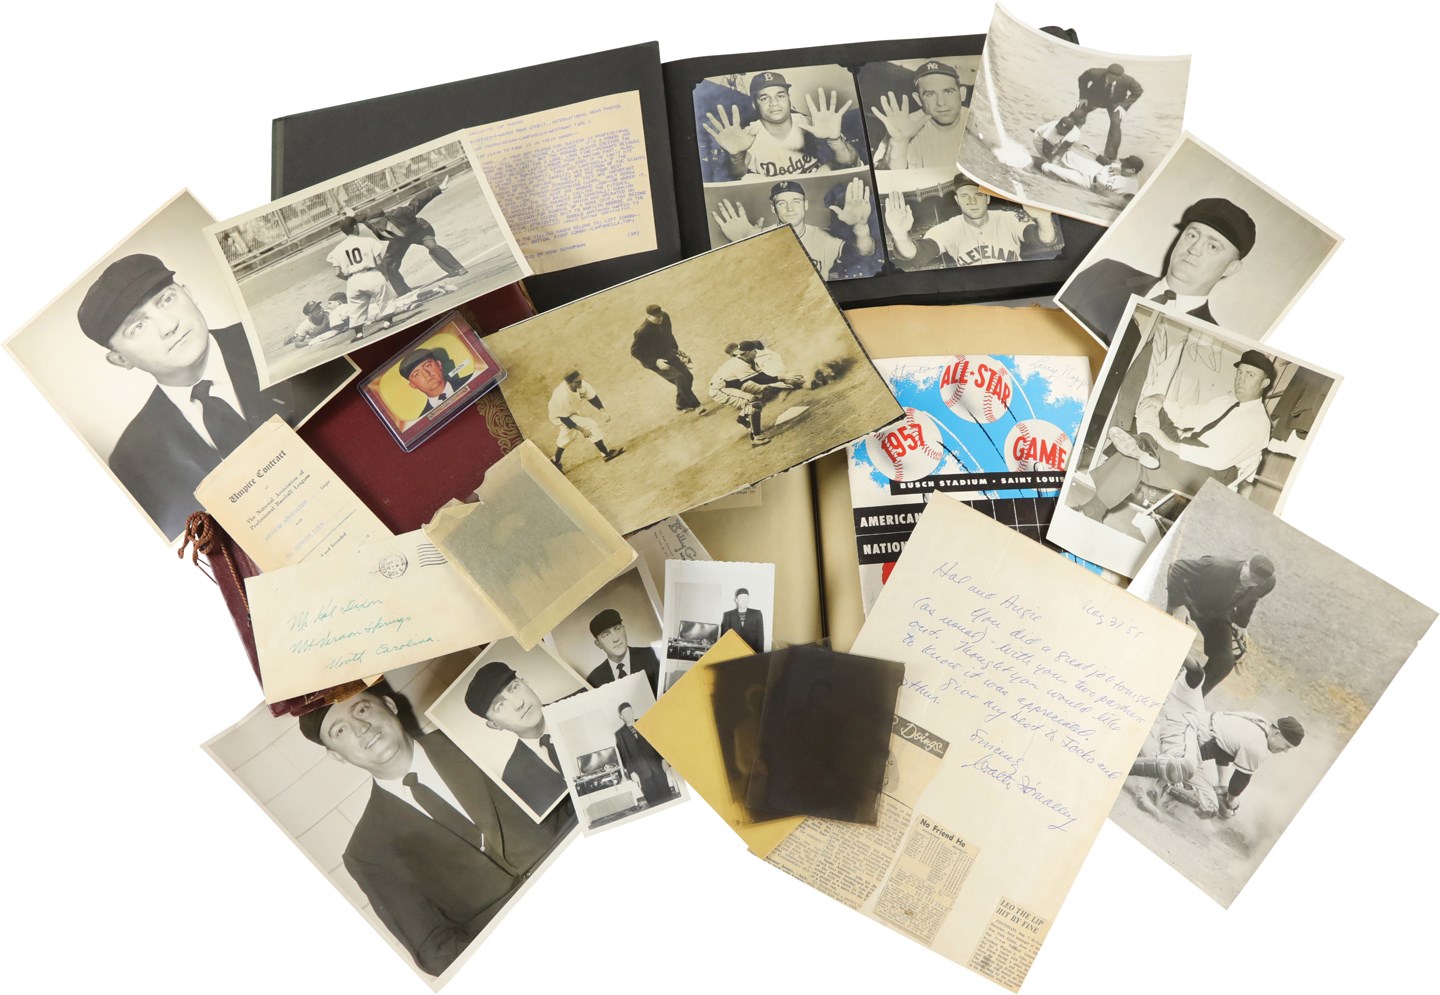 - Umpire Hal Dixon Personal Effects Collection with Contracts, Photographs, Autographs and More